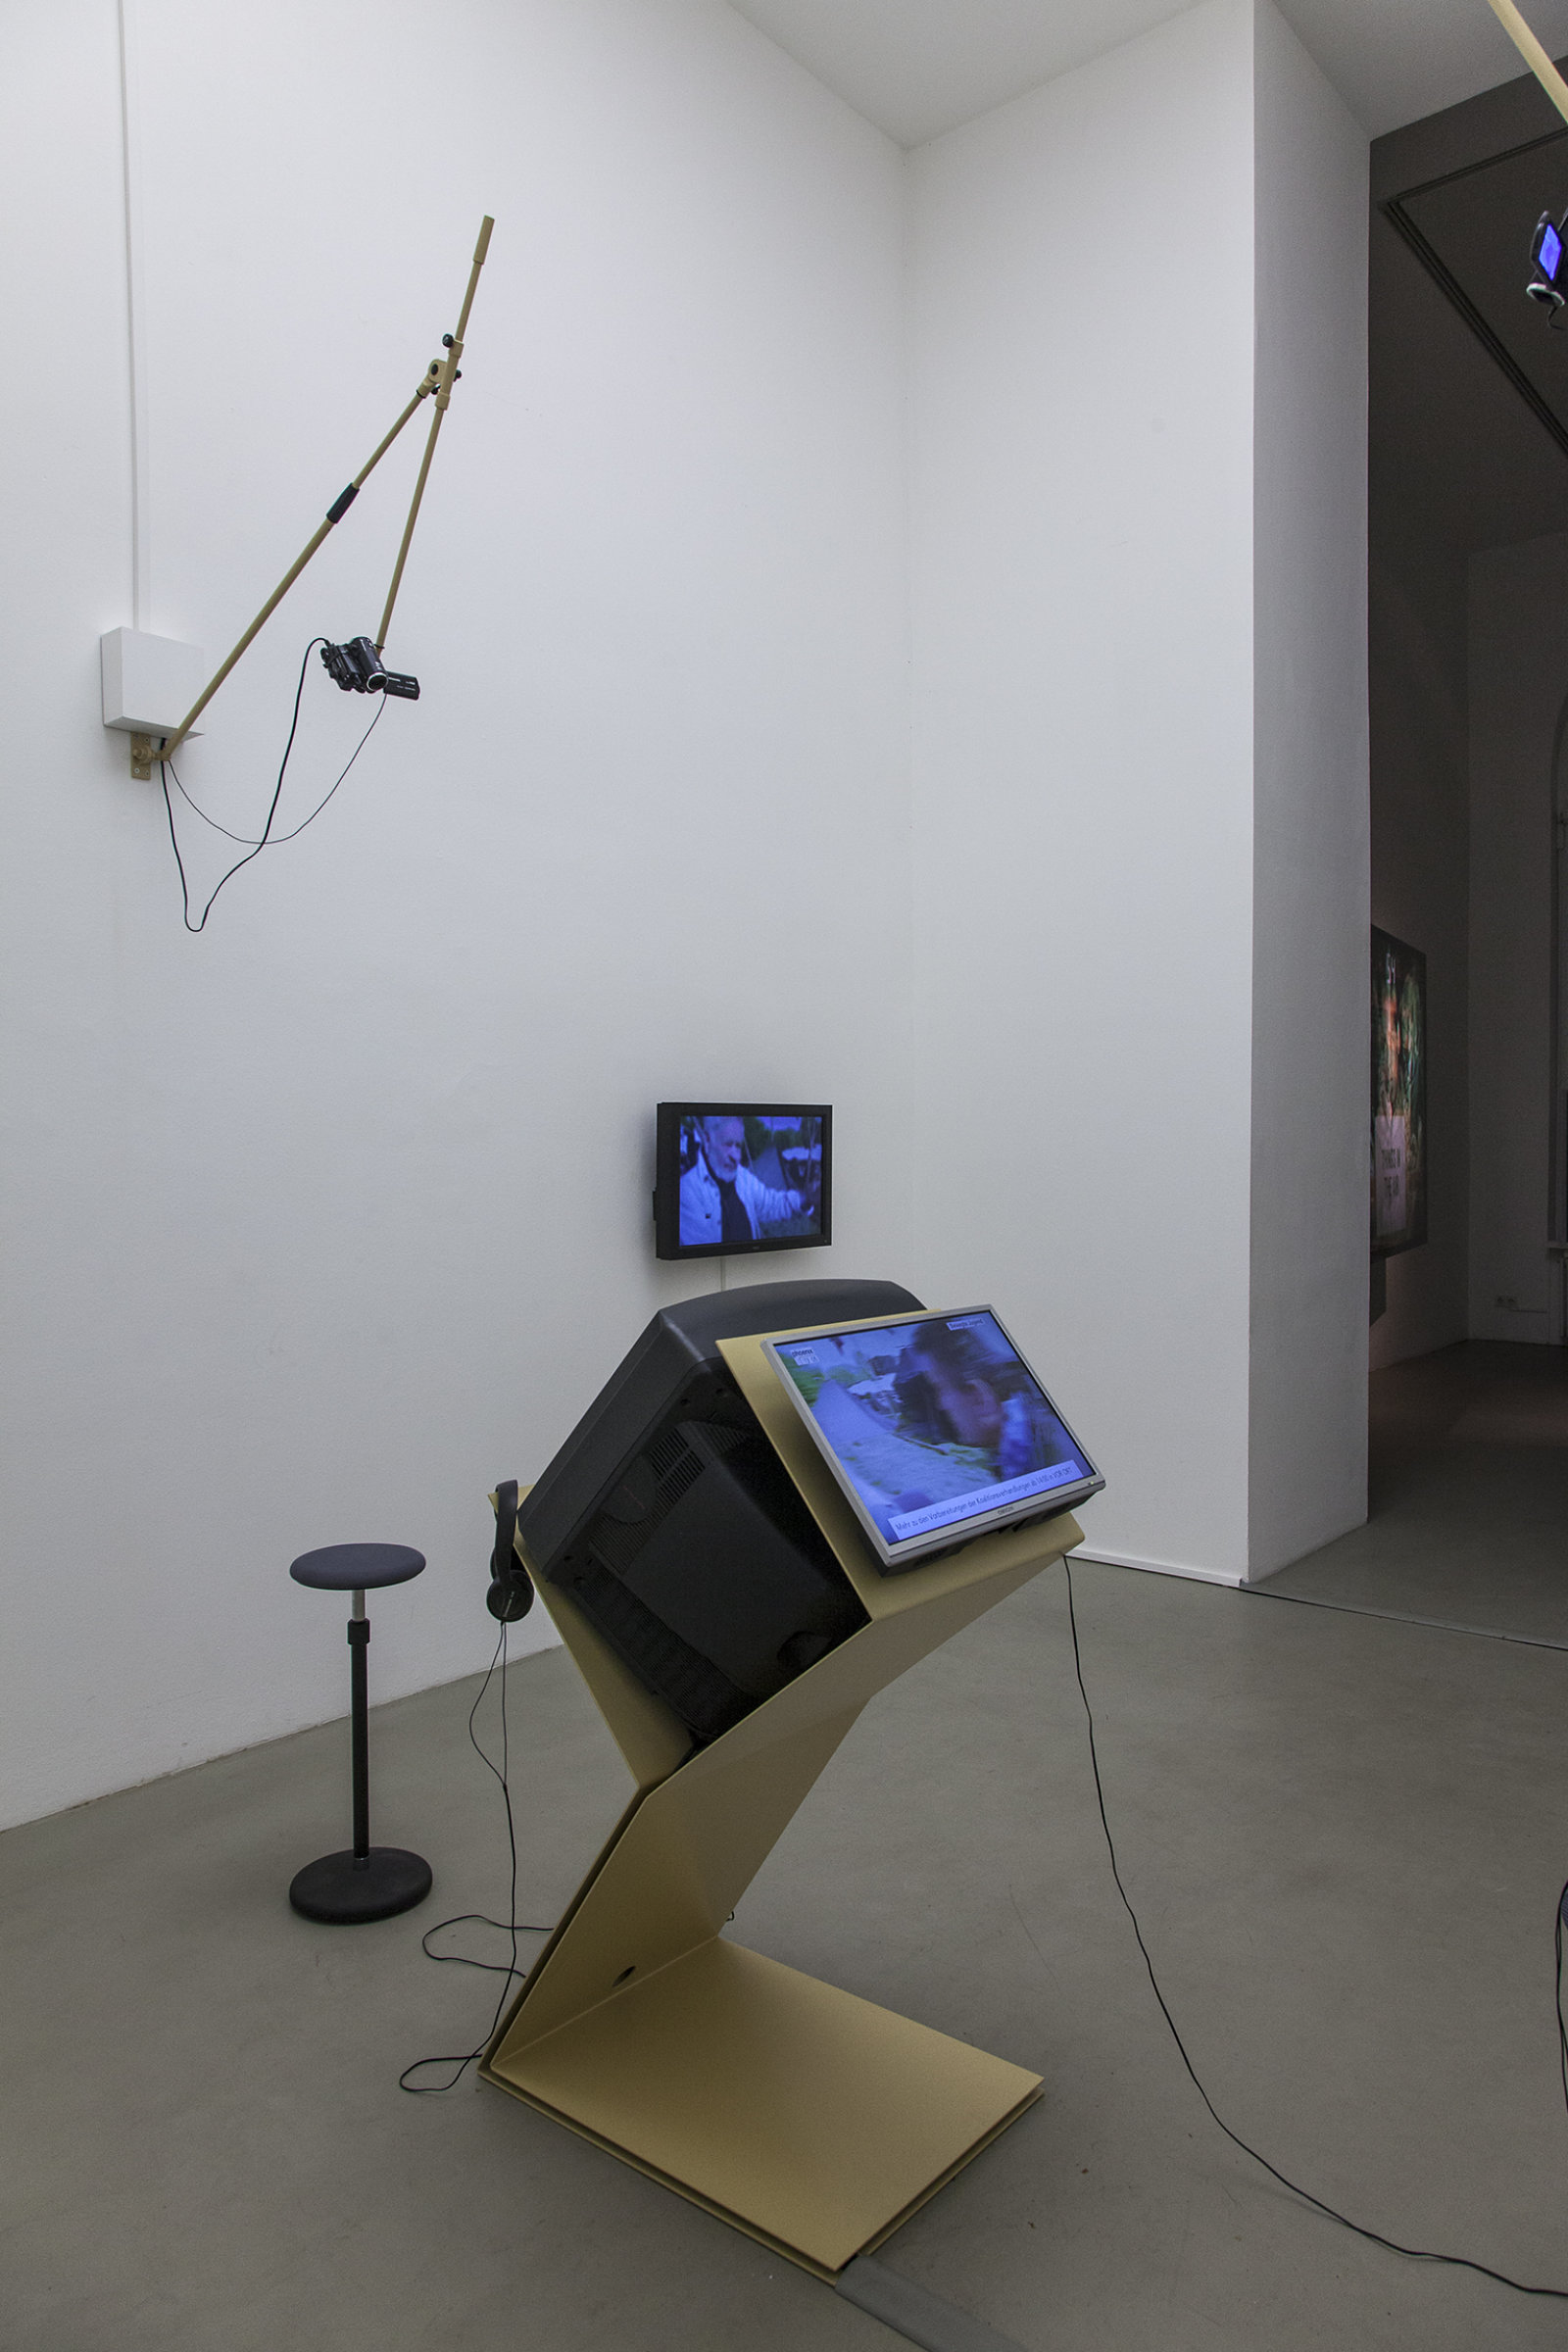 Judy Radul, A CONTAINER CONTAINING NOT ONE TV, 2013, powder coated steel, CRT television, 2 flatscreen televisions, local television signal, remote control, two live video cameras, maxmsp patch, dimensions variable. Installation view, This	is	Television,	Daadgalerie,	Berlin,	Germany, 2013